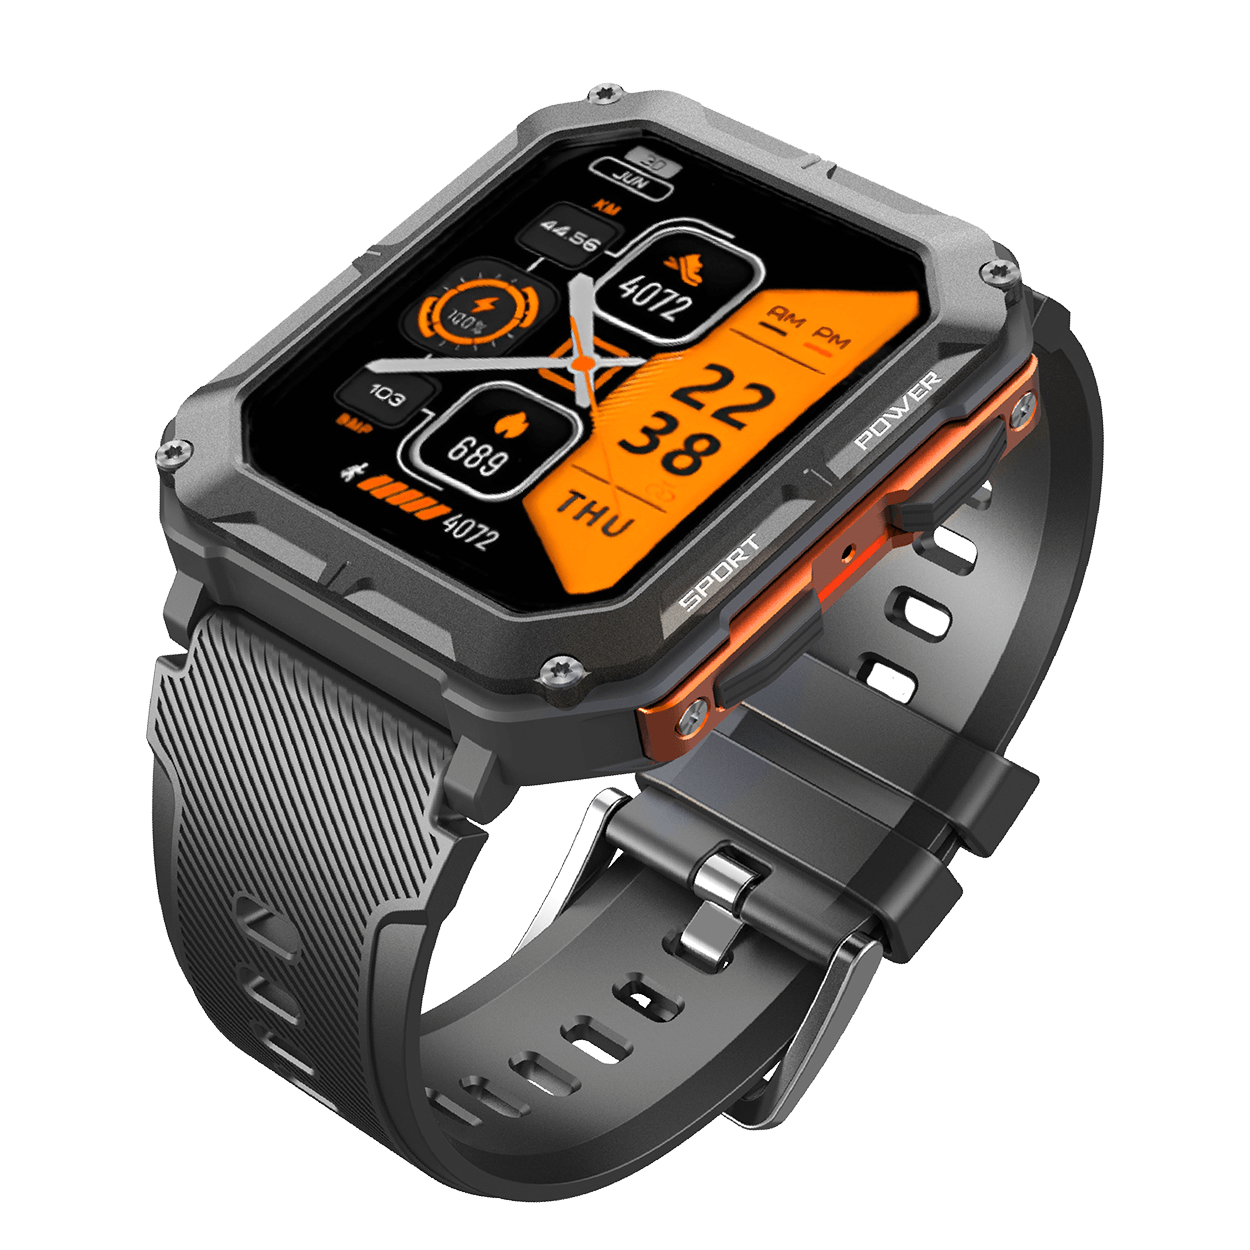 🎉🎉🎉Holiday SALE is live🎉🎉🎉The Indestructible Smartwatch